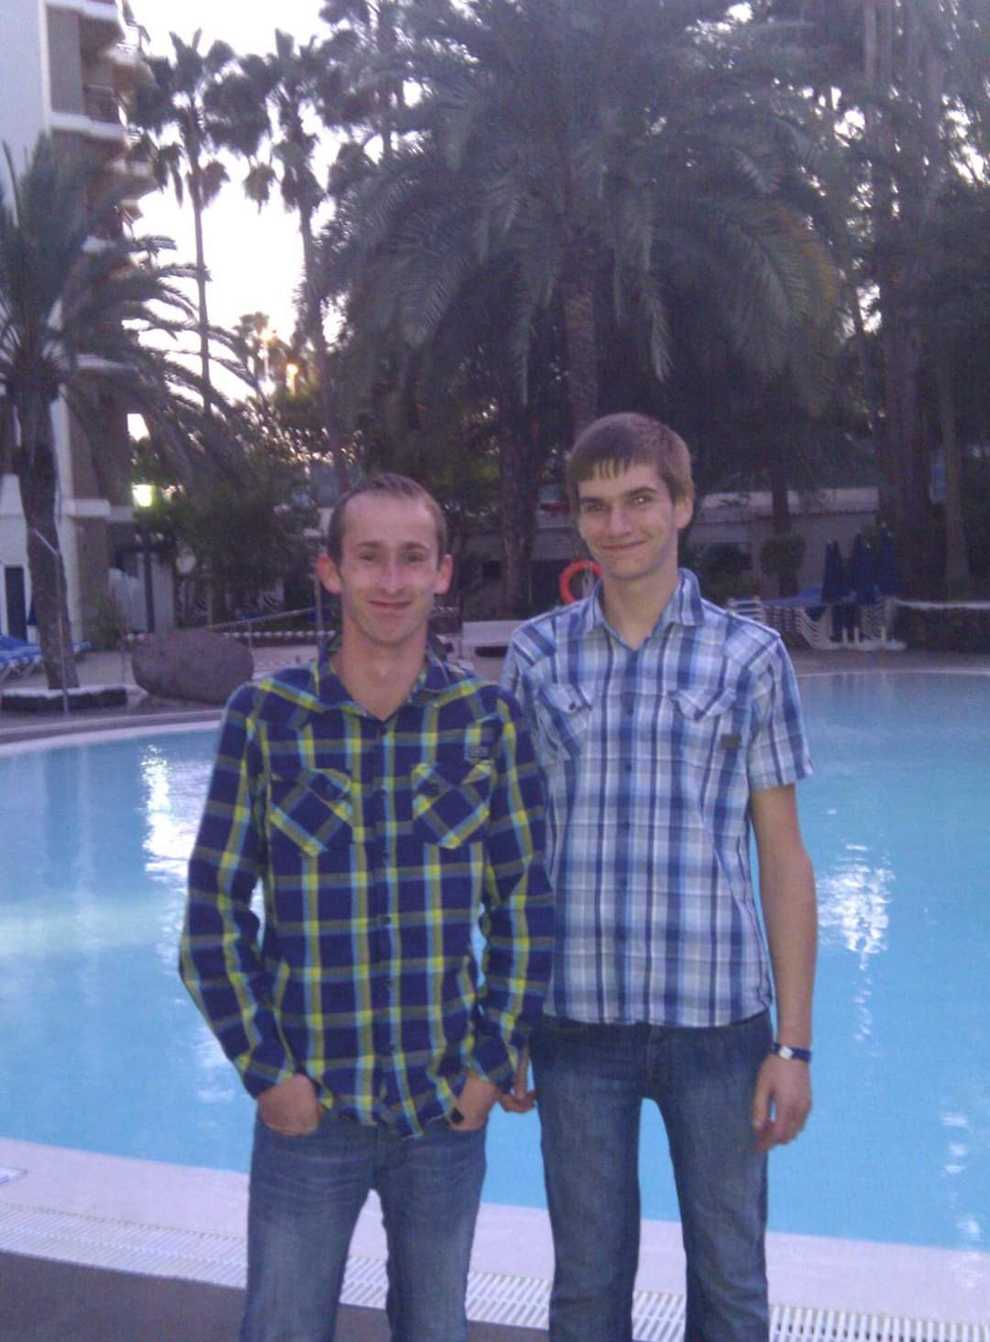 Ricky Waumsley (left) and Daniel Whitworth (East London Inquests/PA)